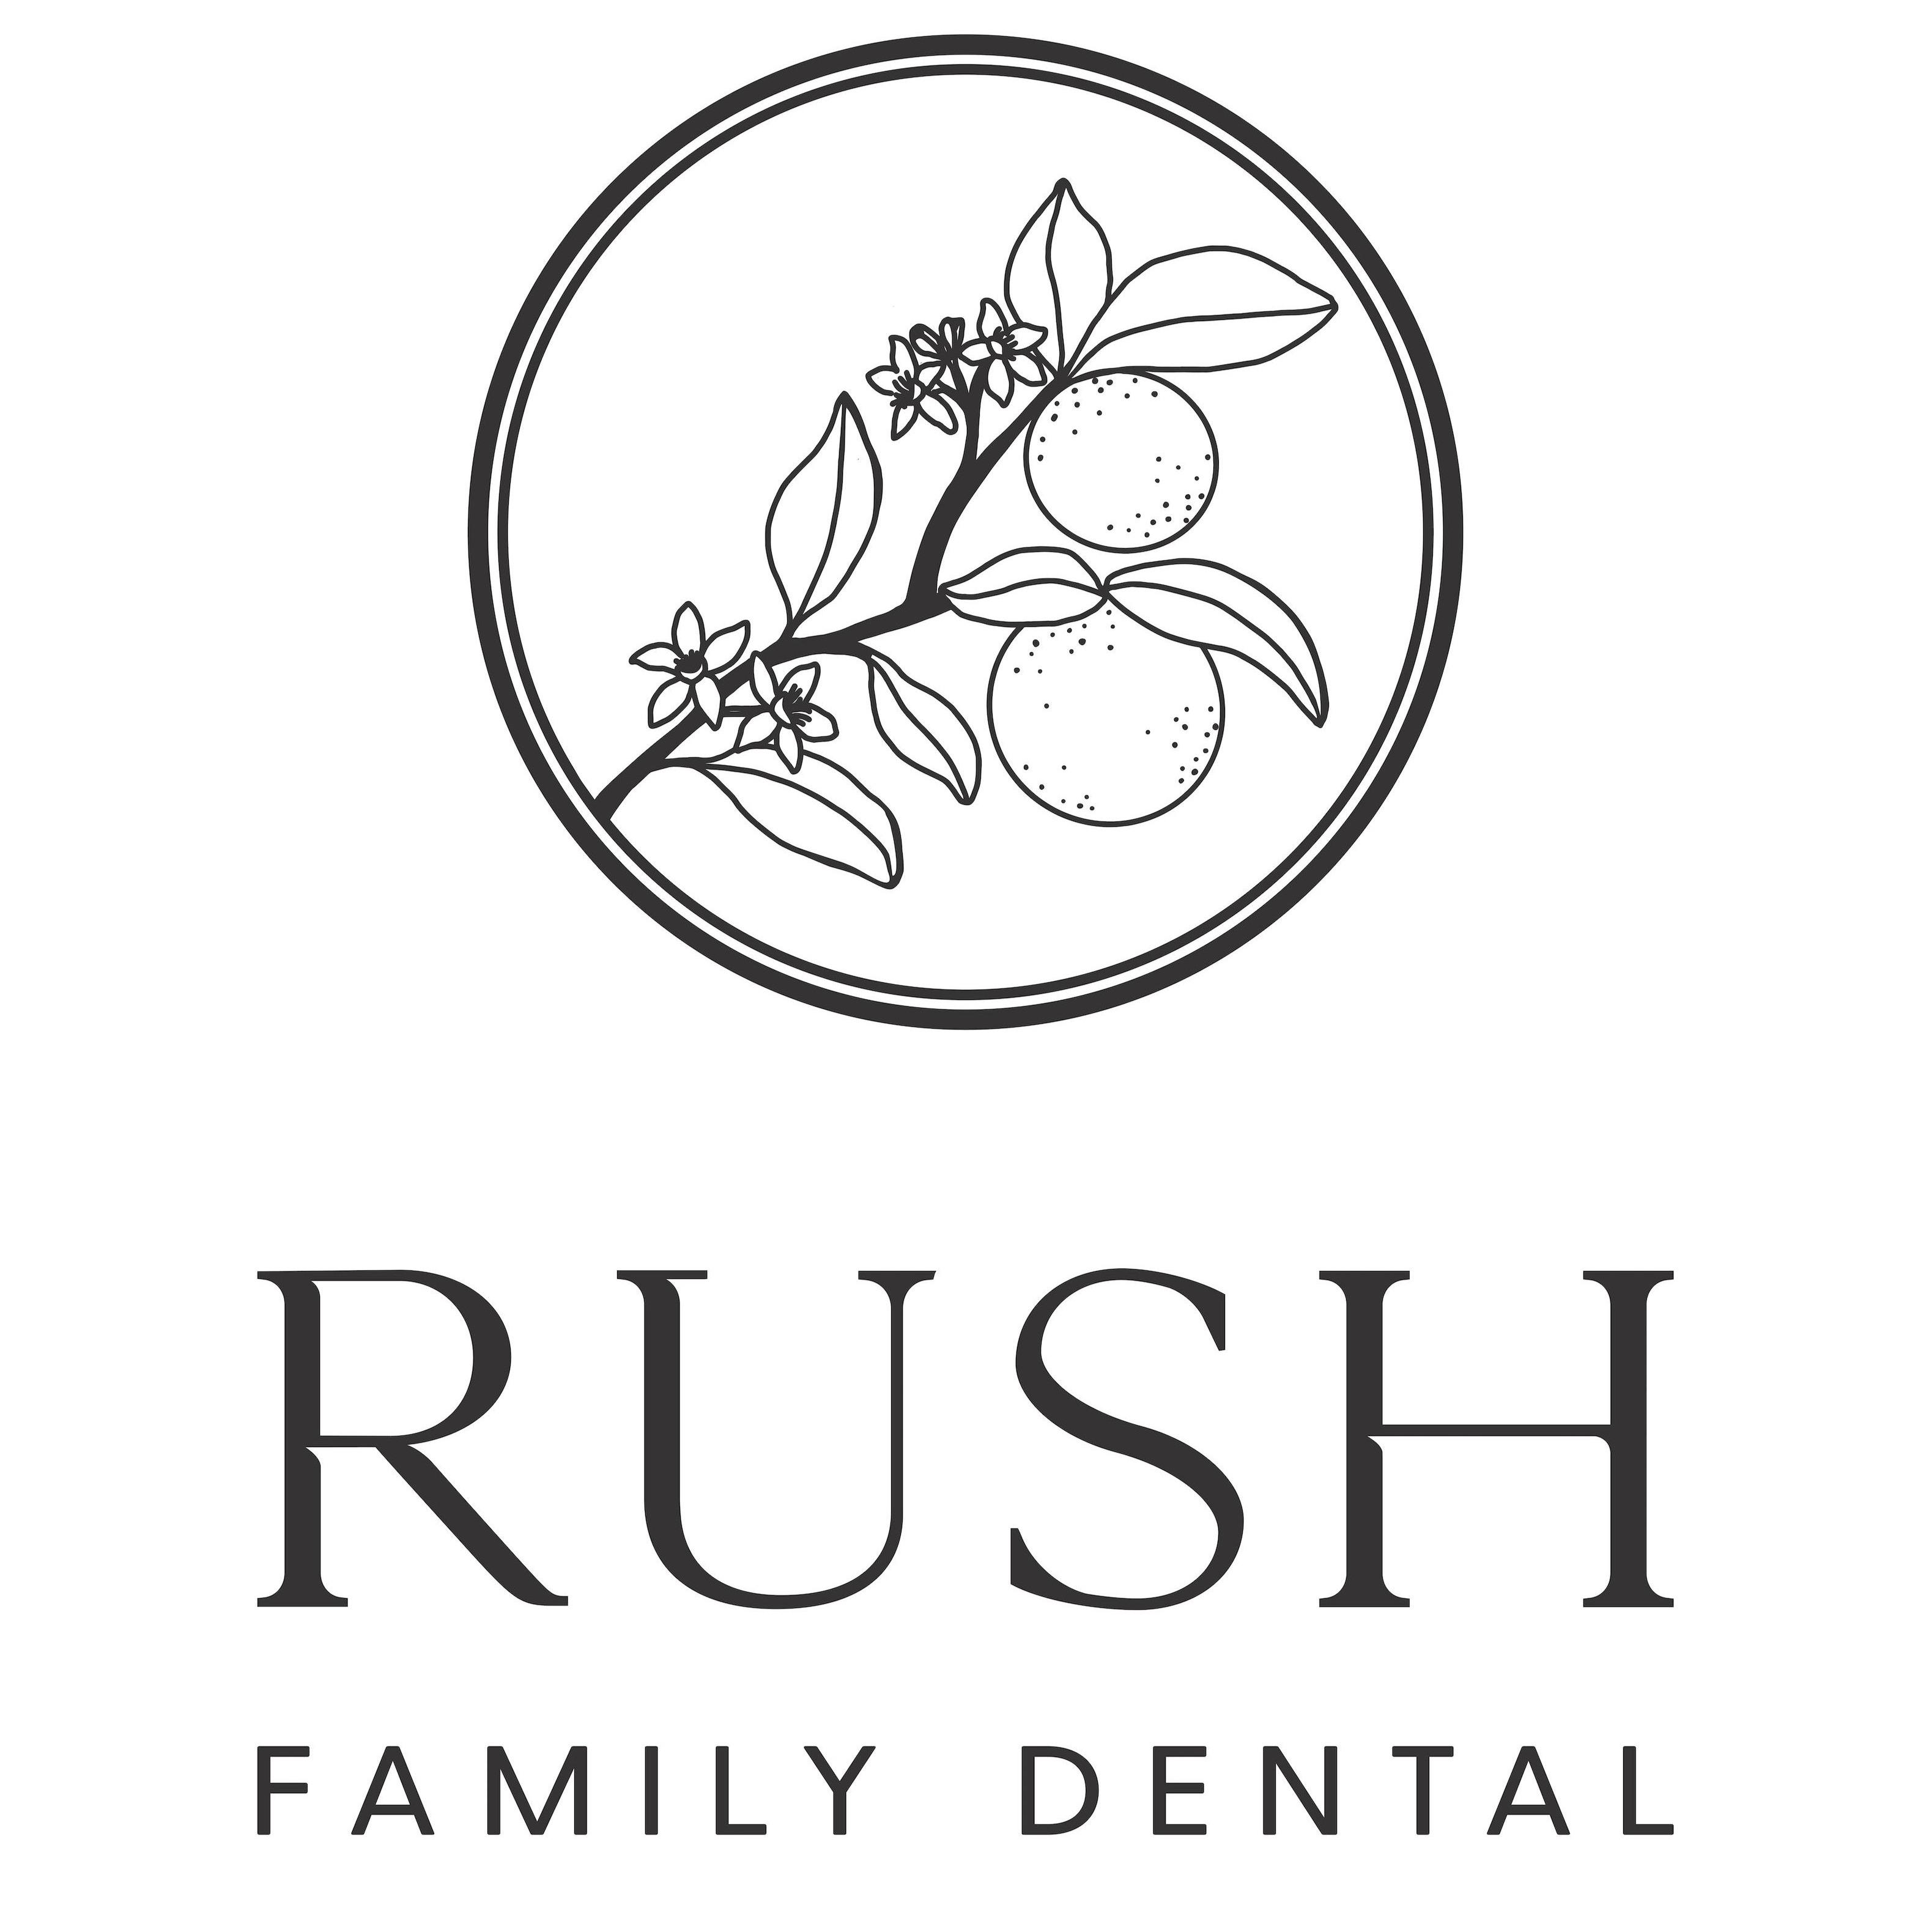 Rush Family Dental is a family-owned dental practice that has provided premium dental care for all a Rush Family Dental Phoenix (480)893-7674